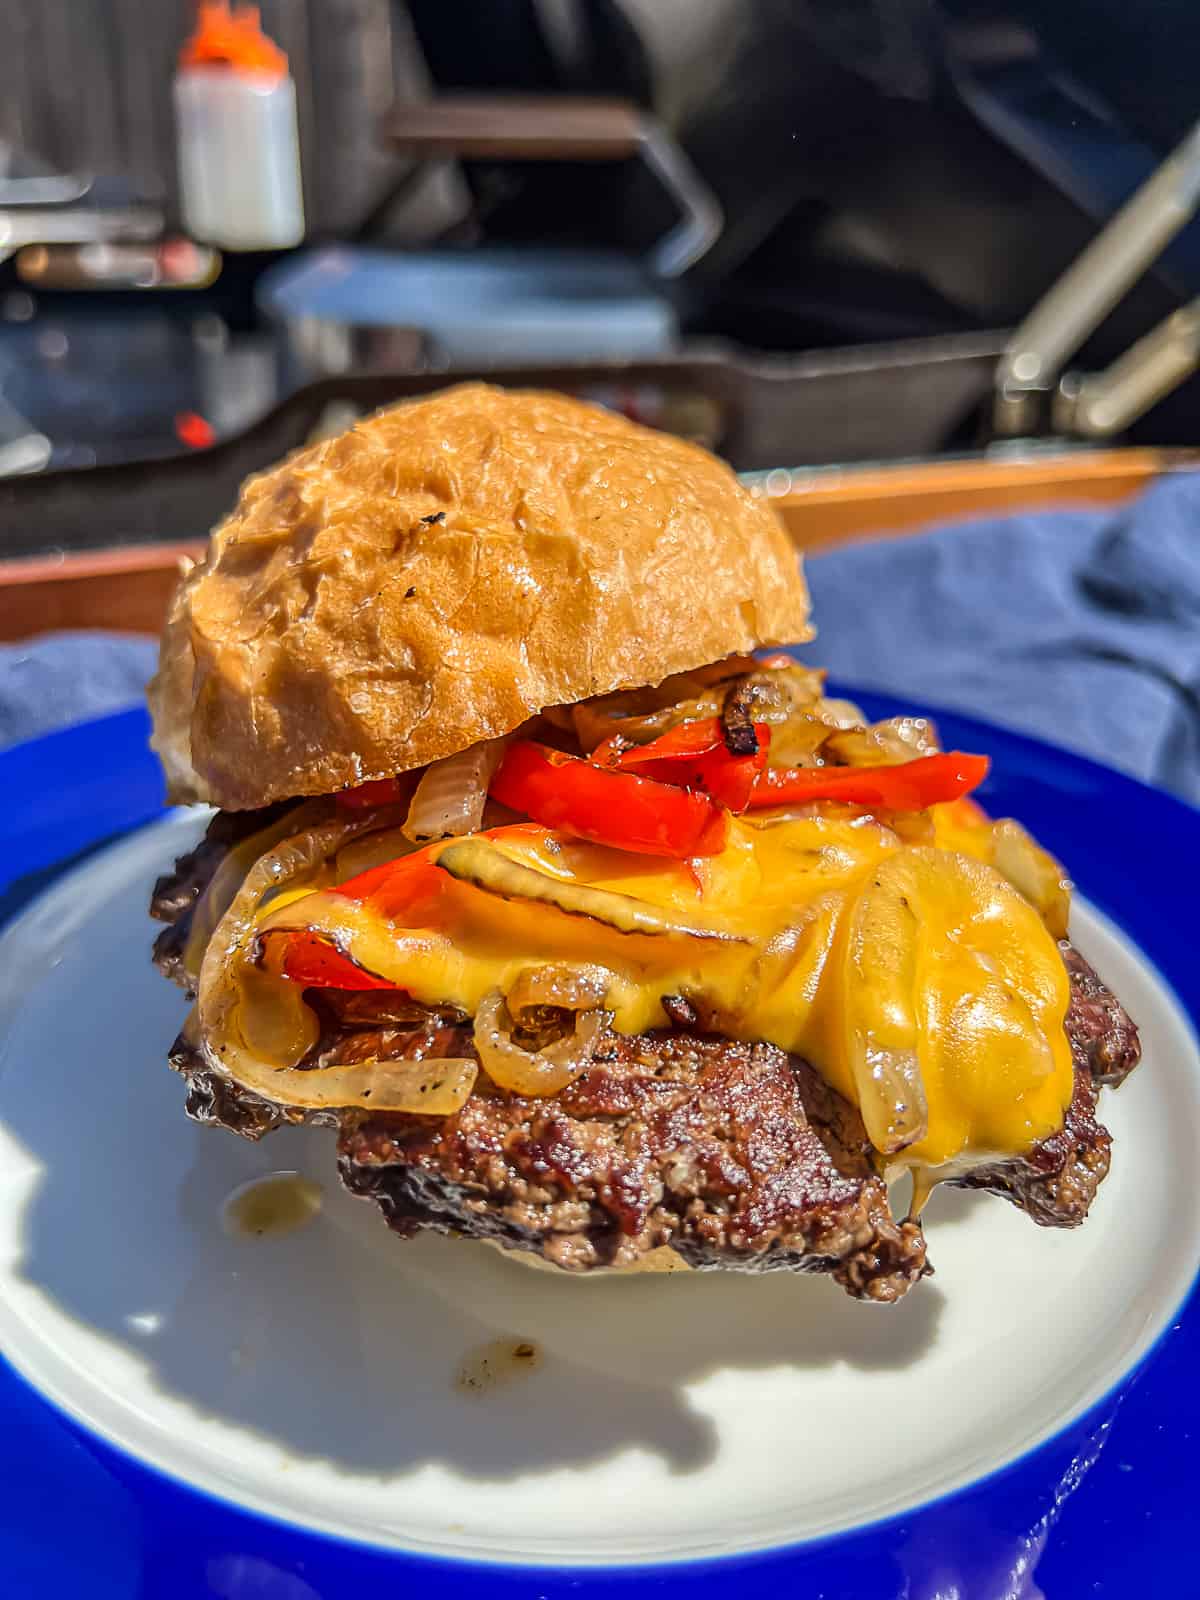 Philly cheesesteak style smashed burgers